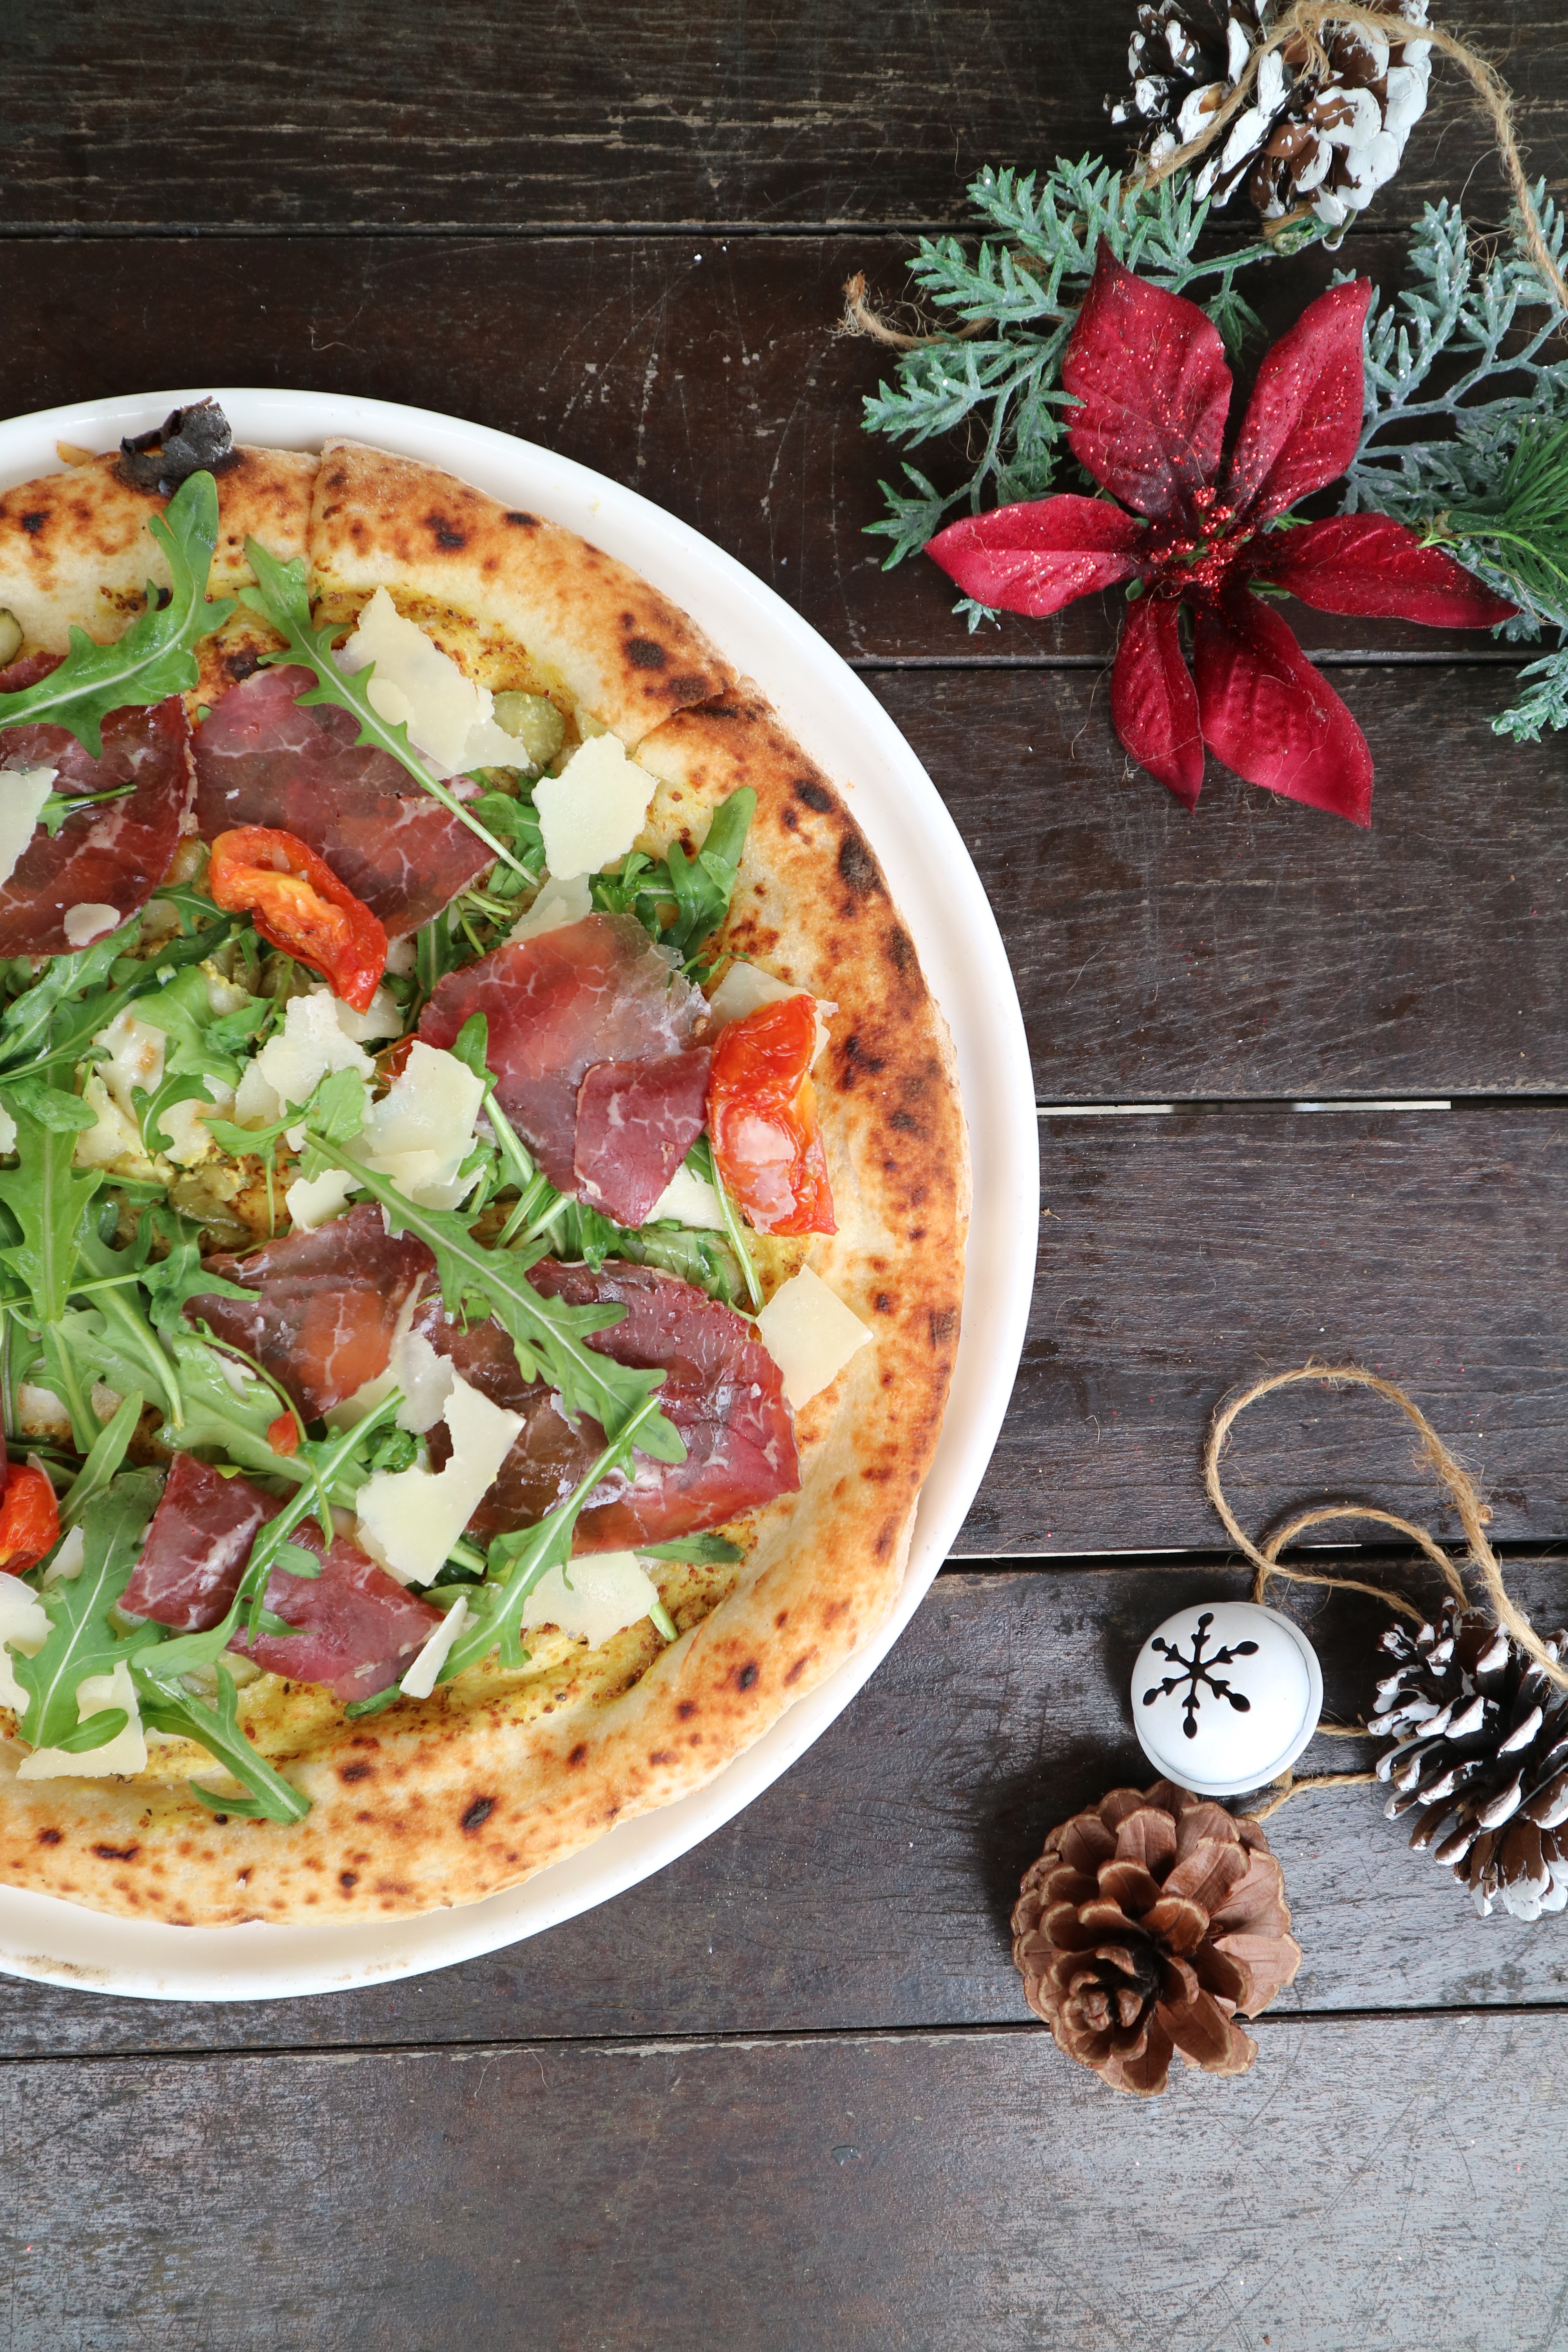 December's Special - Beef Bresaola Pizza